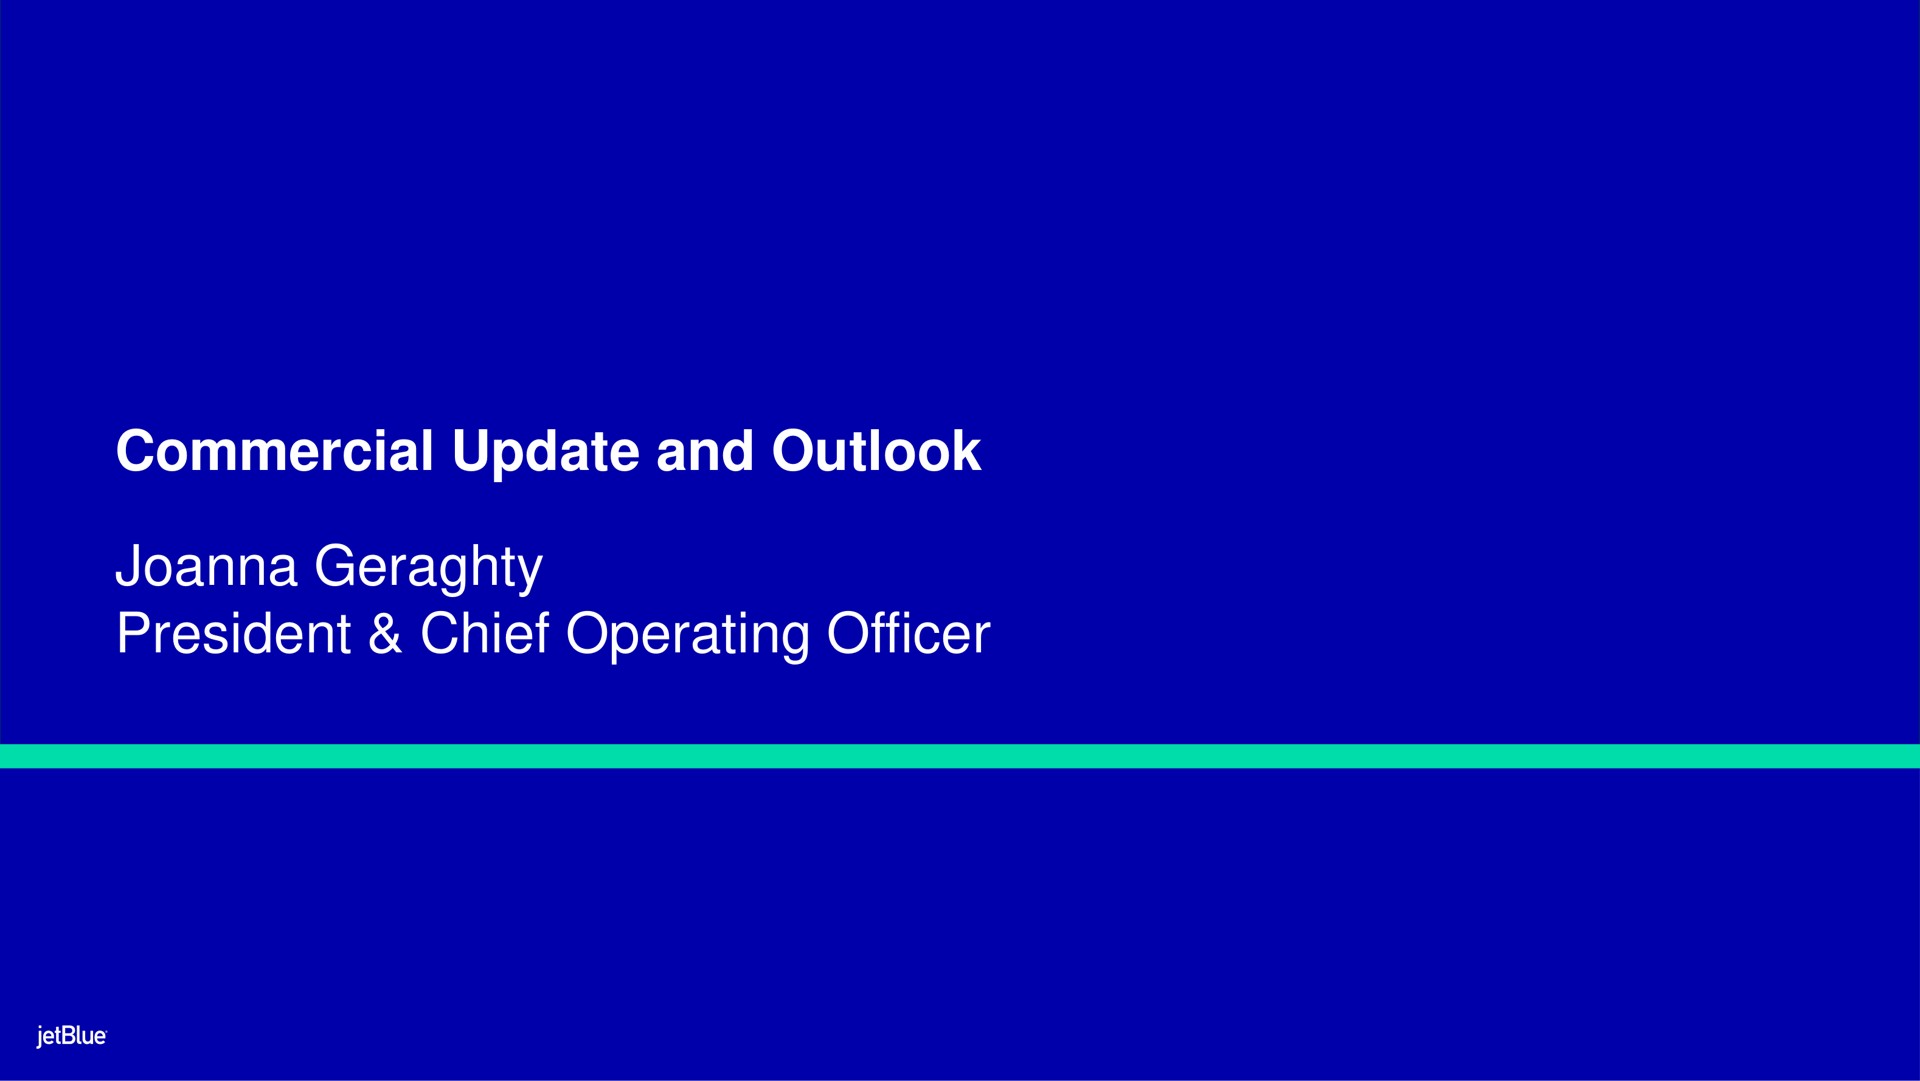 commercial update and outlook president chief operating officer | jetBlue